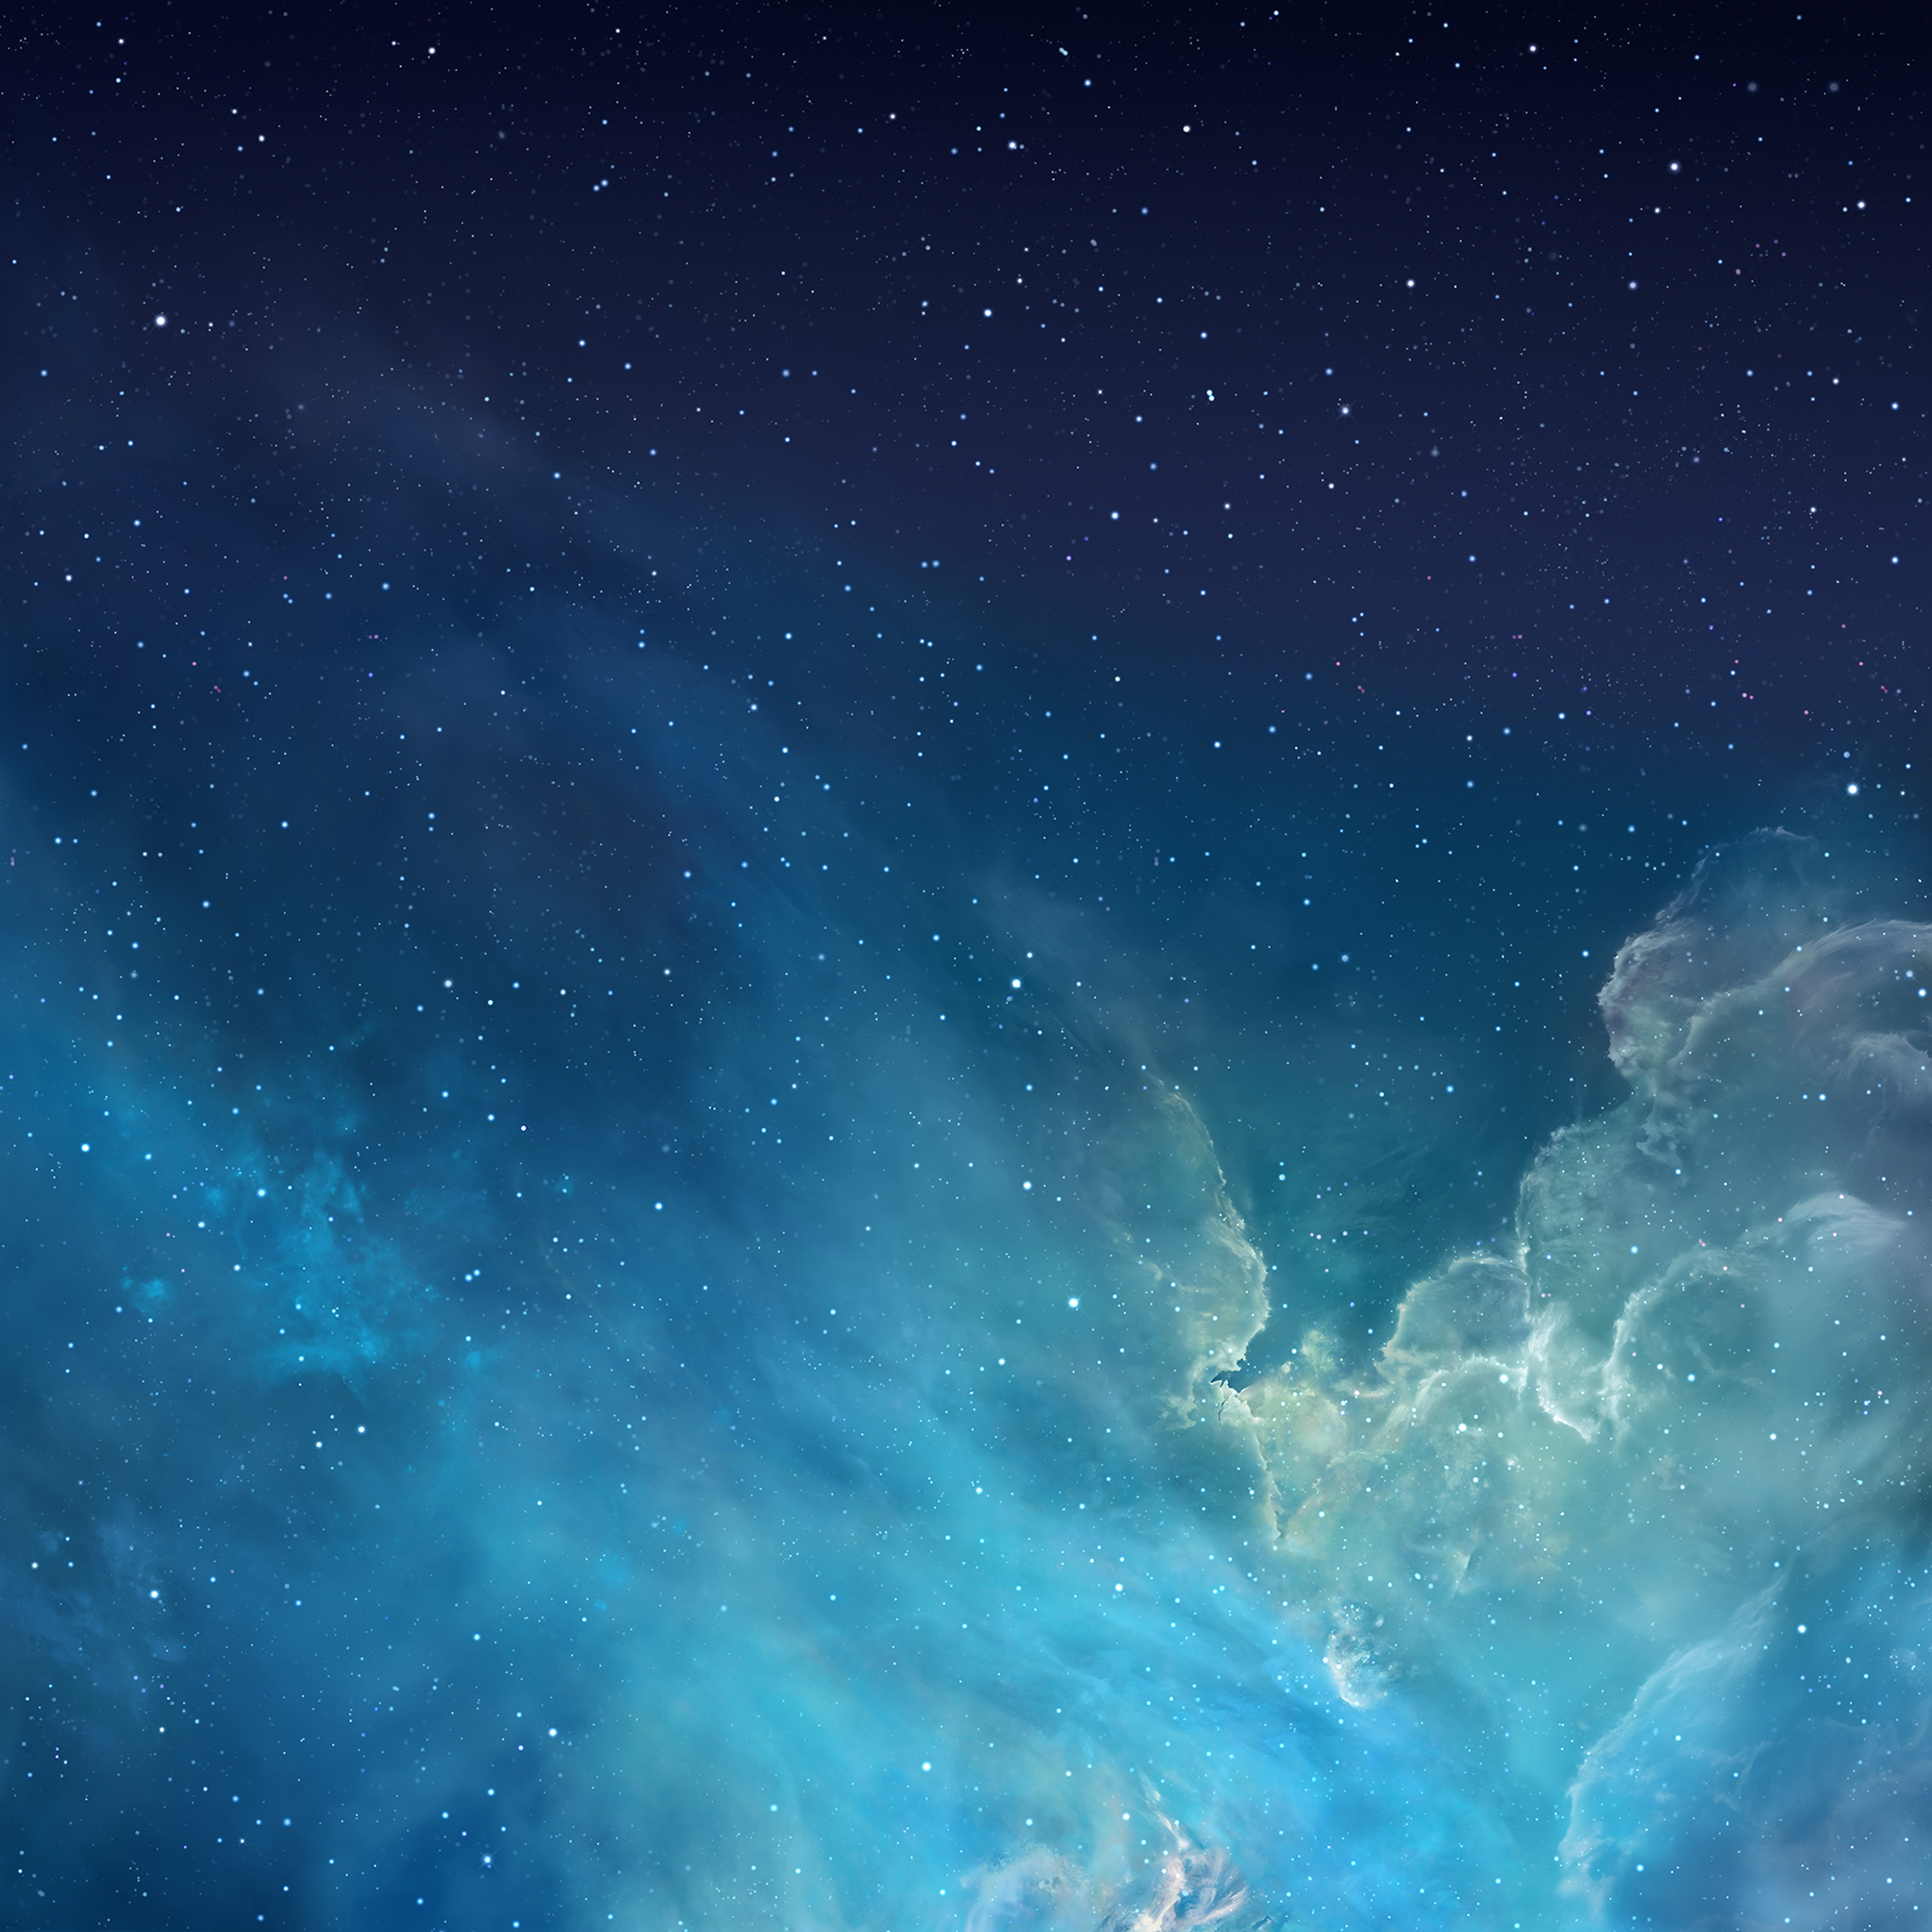 27 wallpapers bundled with the iOS 7 upgrade for iPad